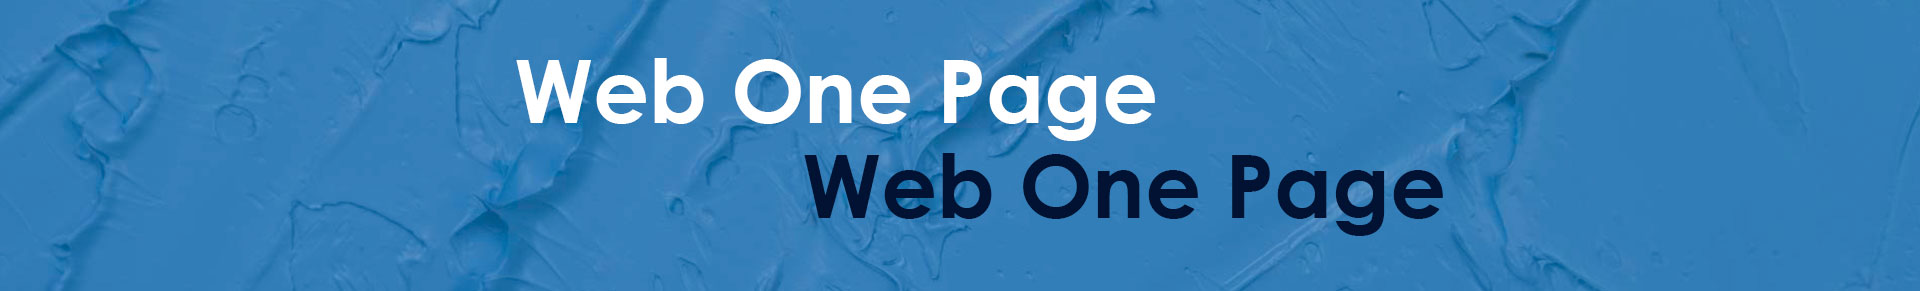 Web One Page